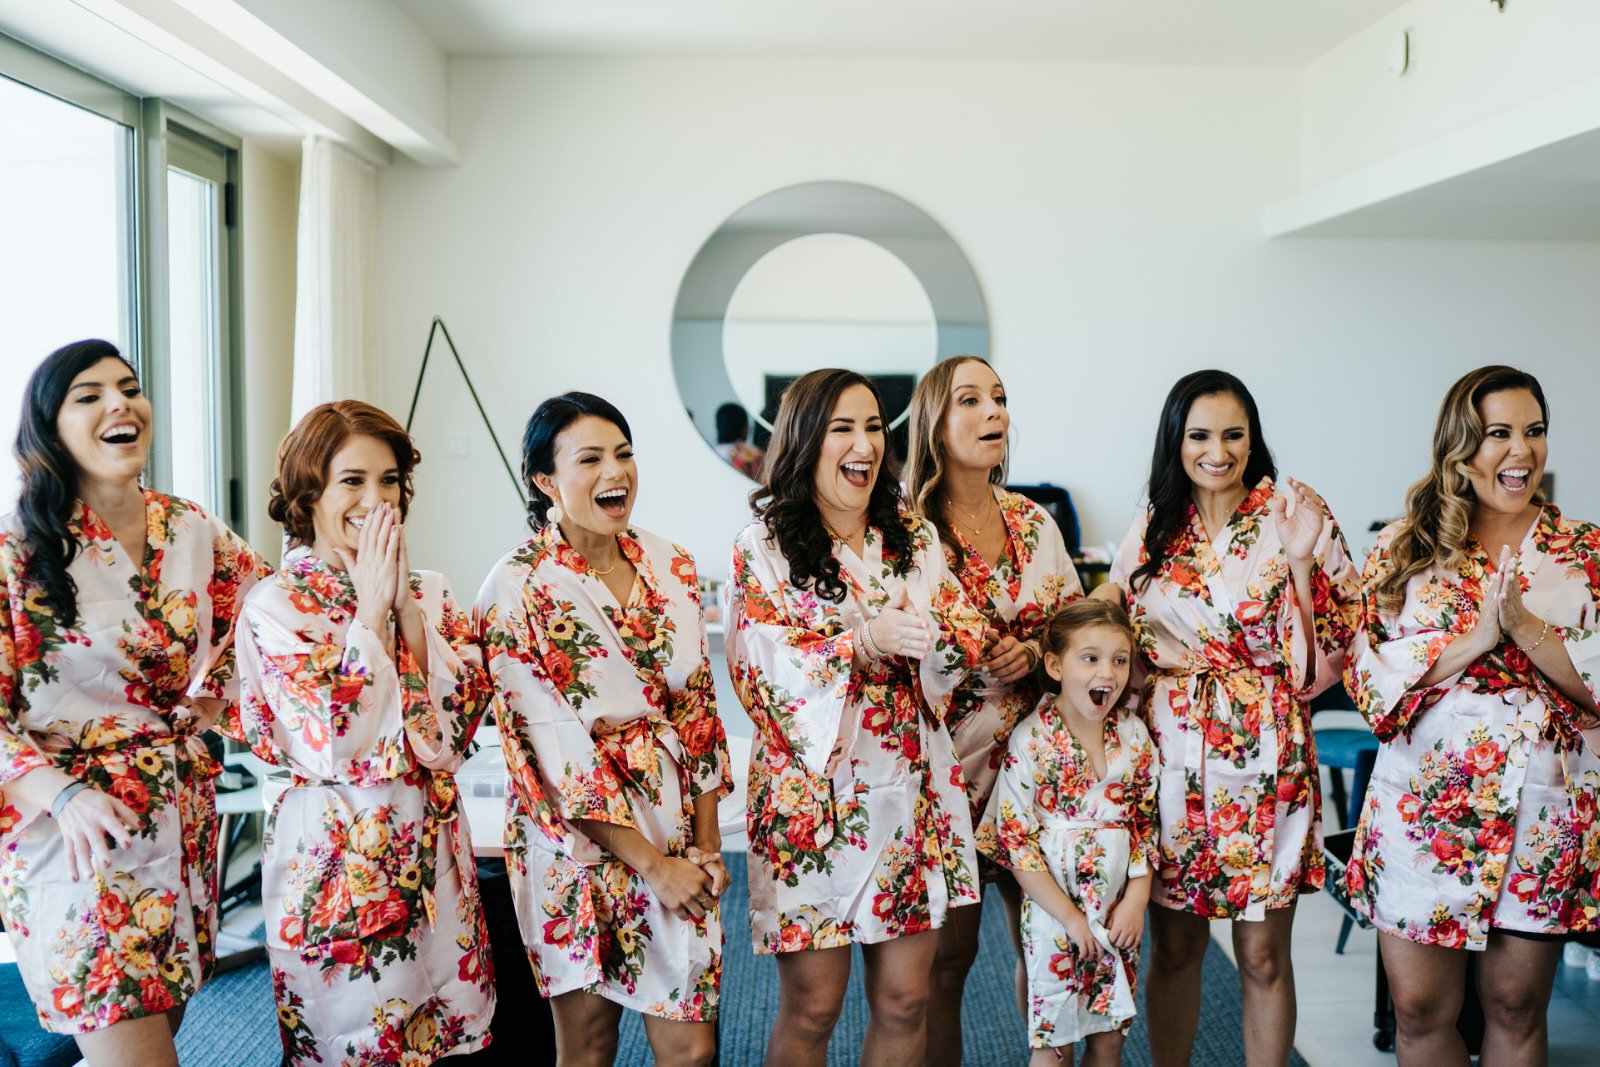 Eight bridesmaids gasp in awe as bride, off camera, reveals what her wedding dress looks like